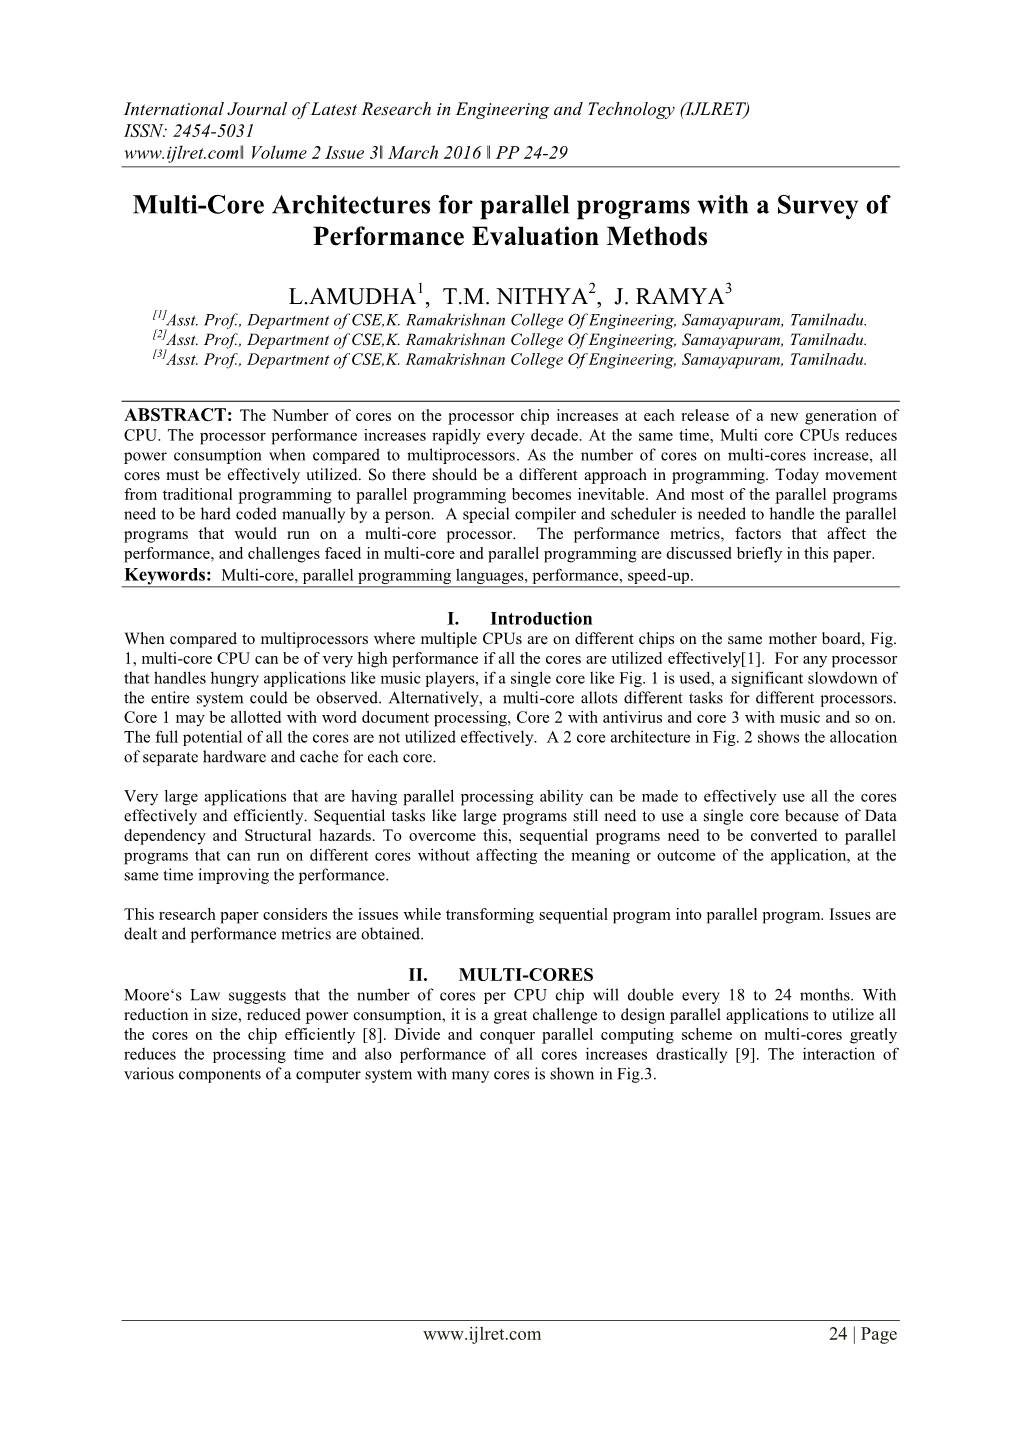 Multi-Core Architectures for Parallel Programs with a Survey of Performance Evaluation Methods